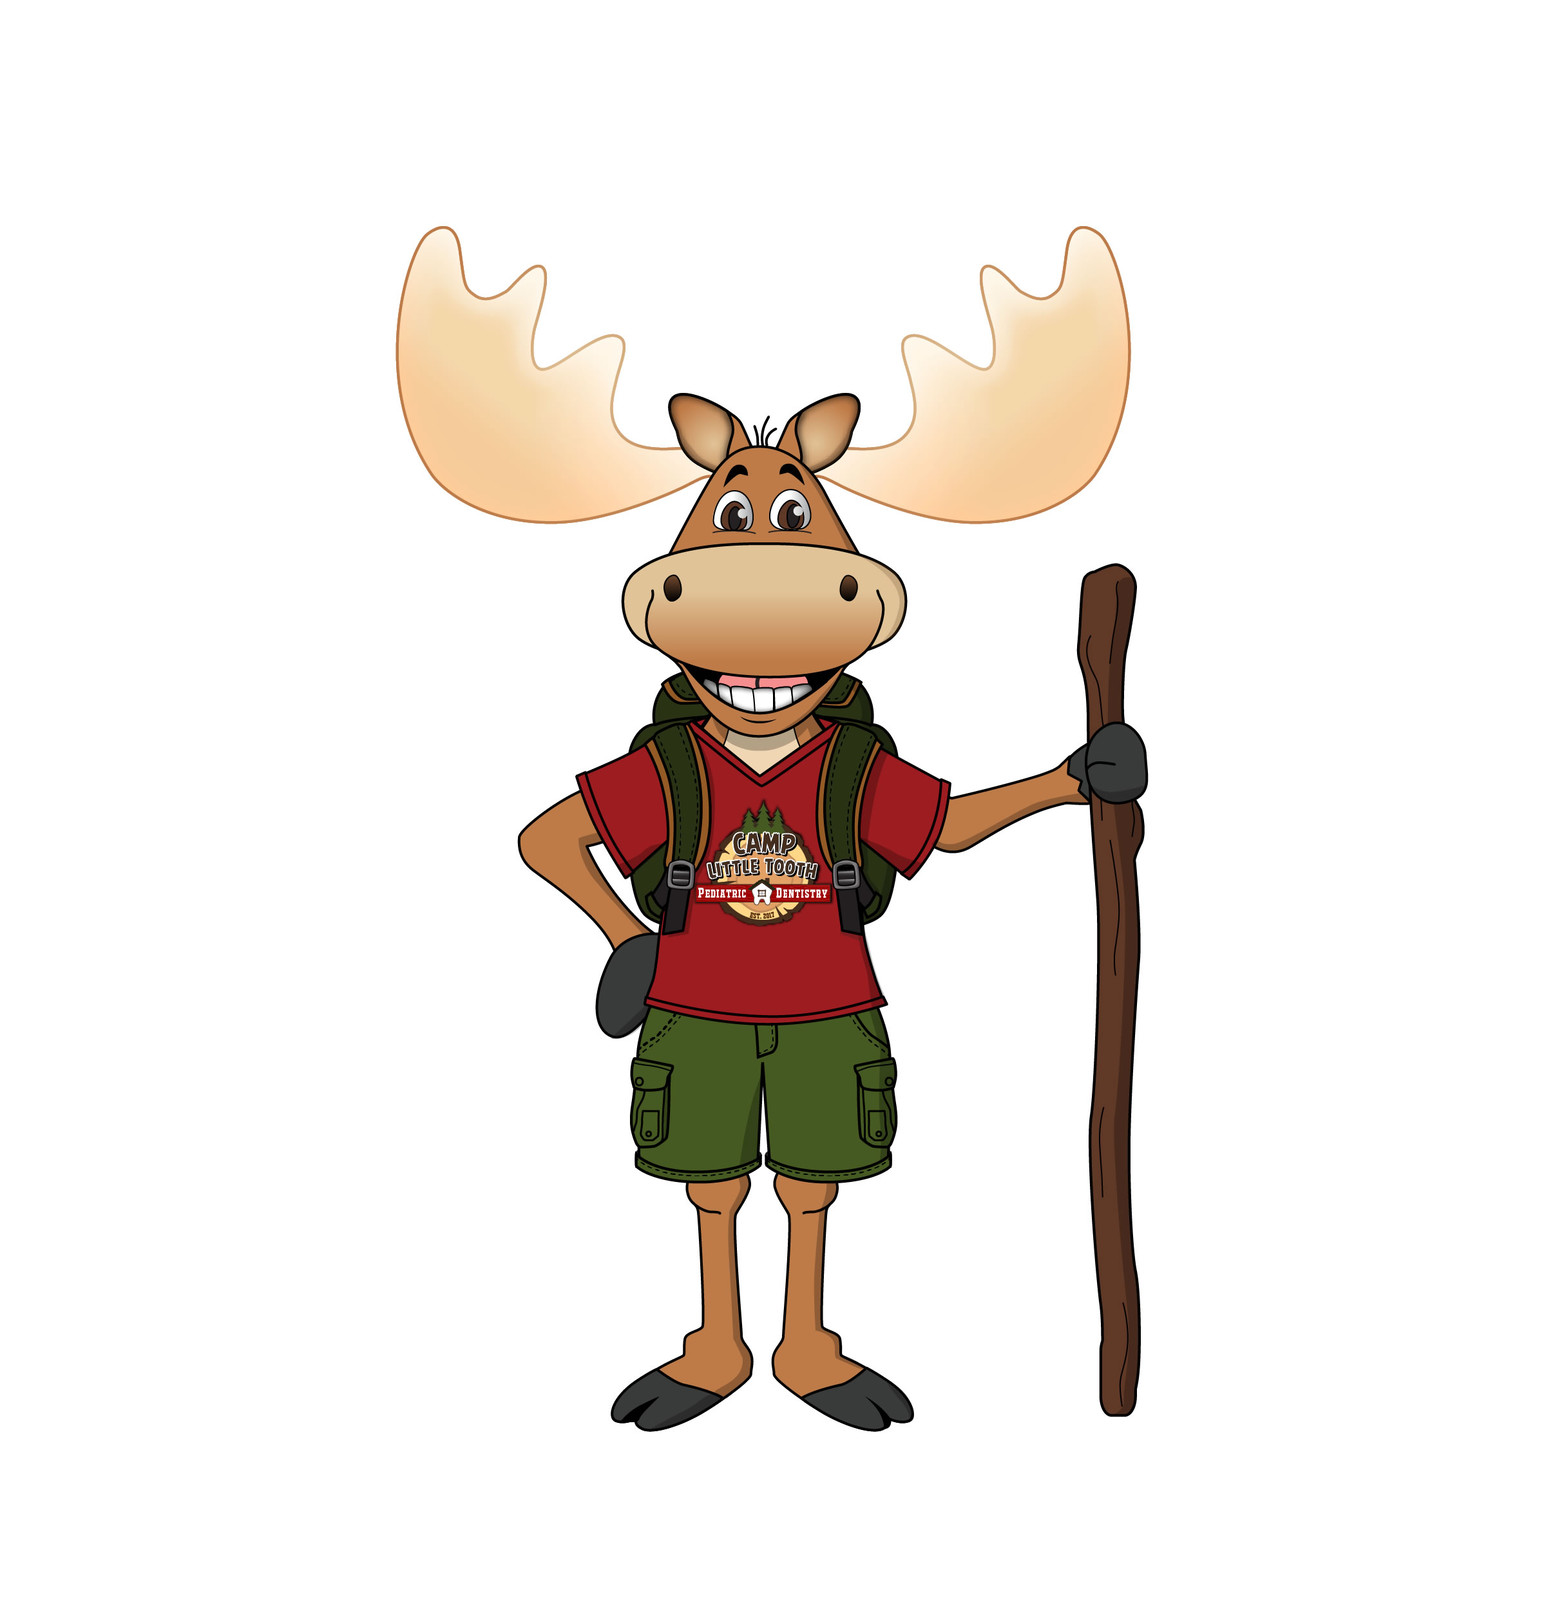 Max the Moose, Camp Little Tooth's mascot